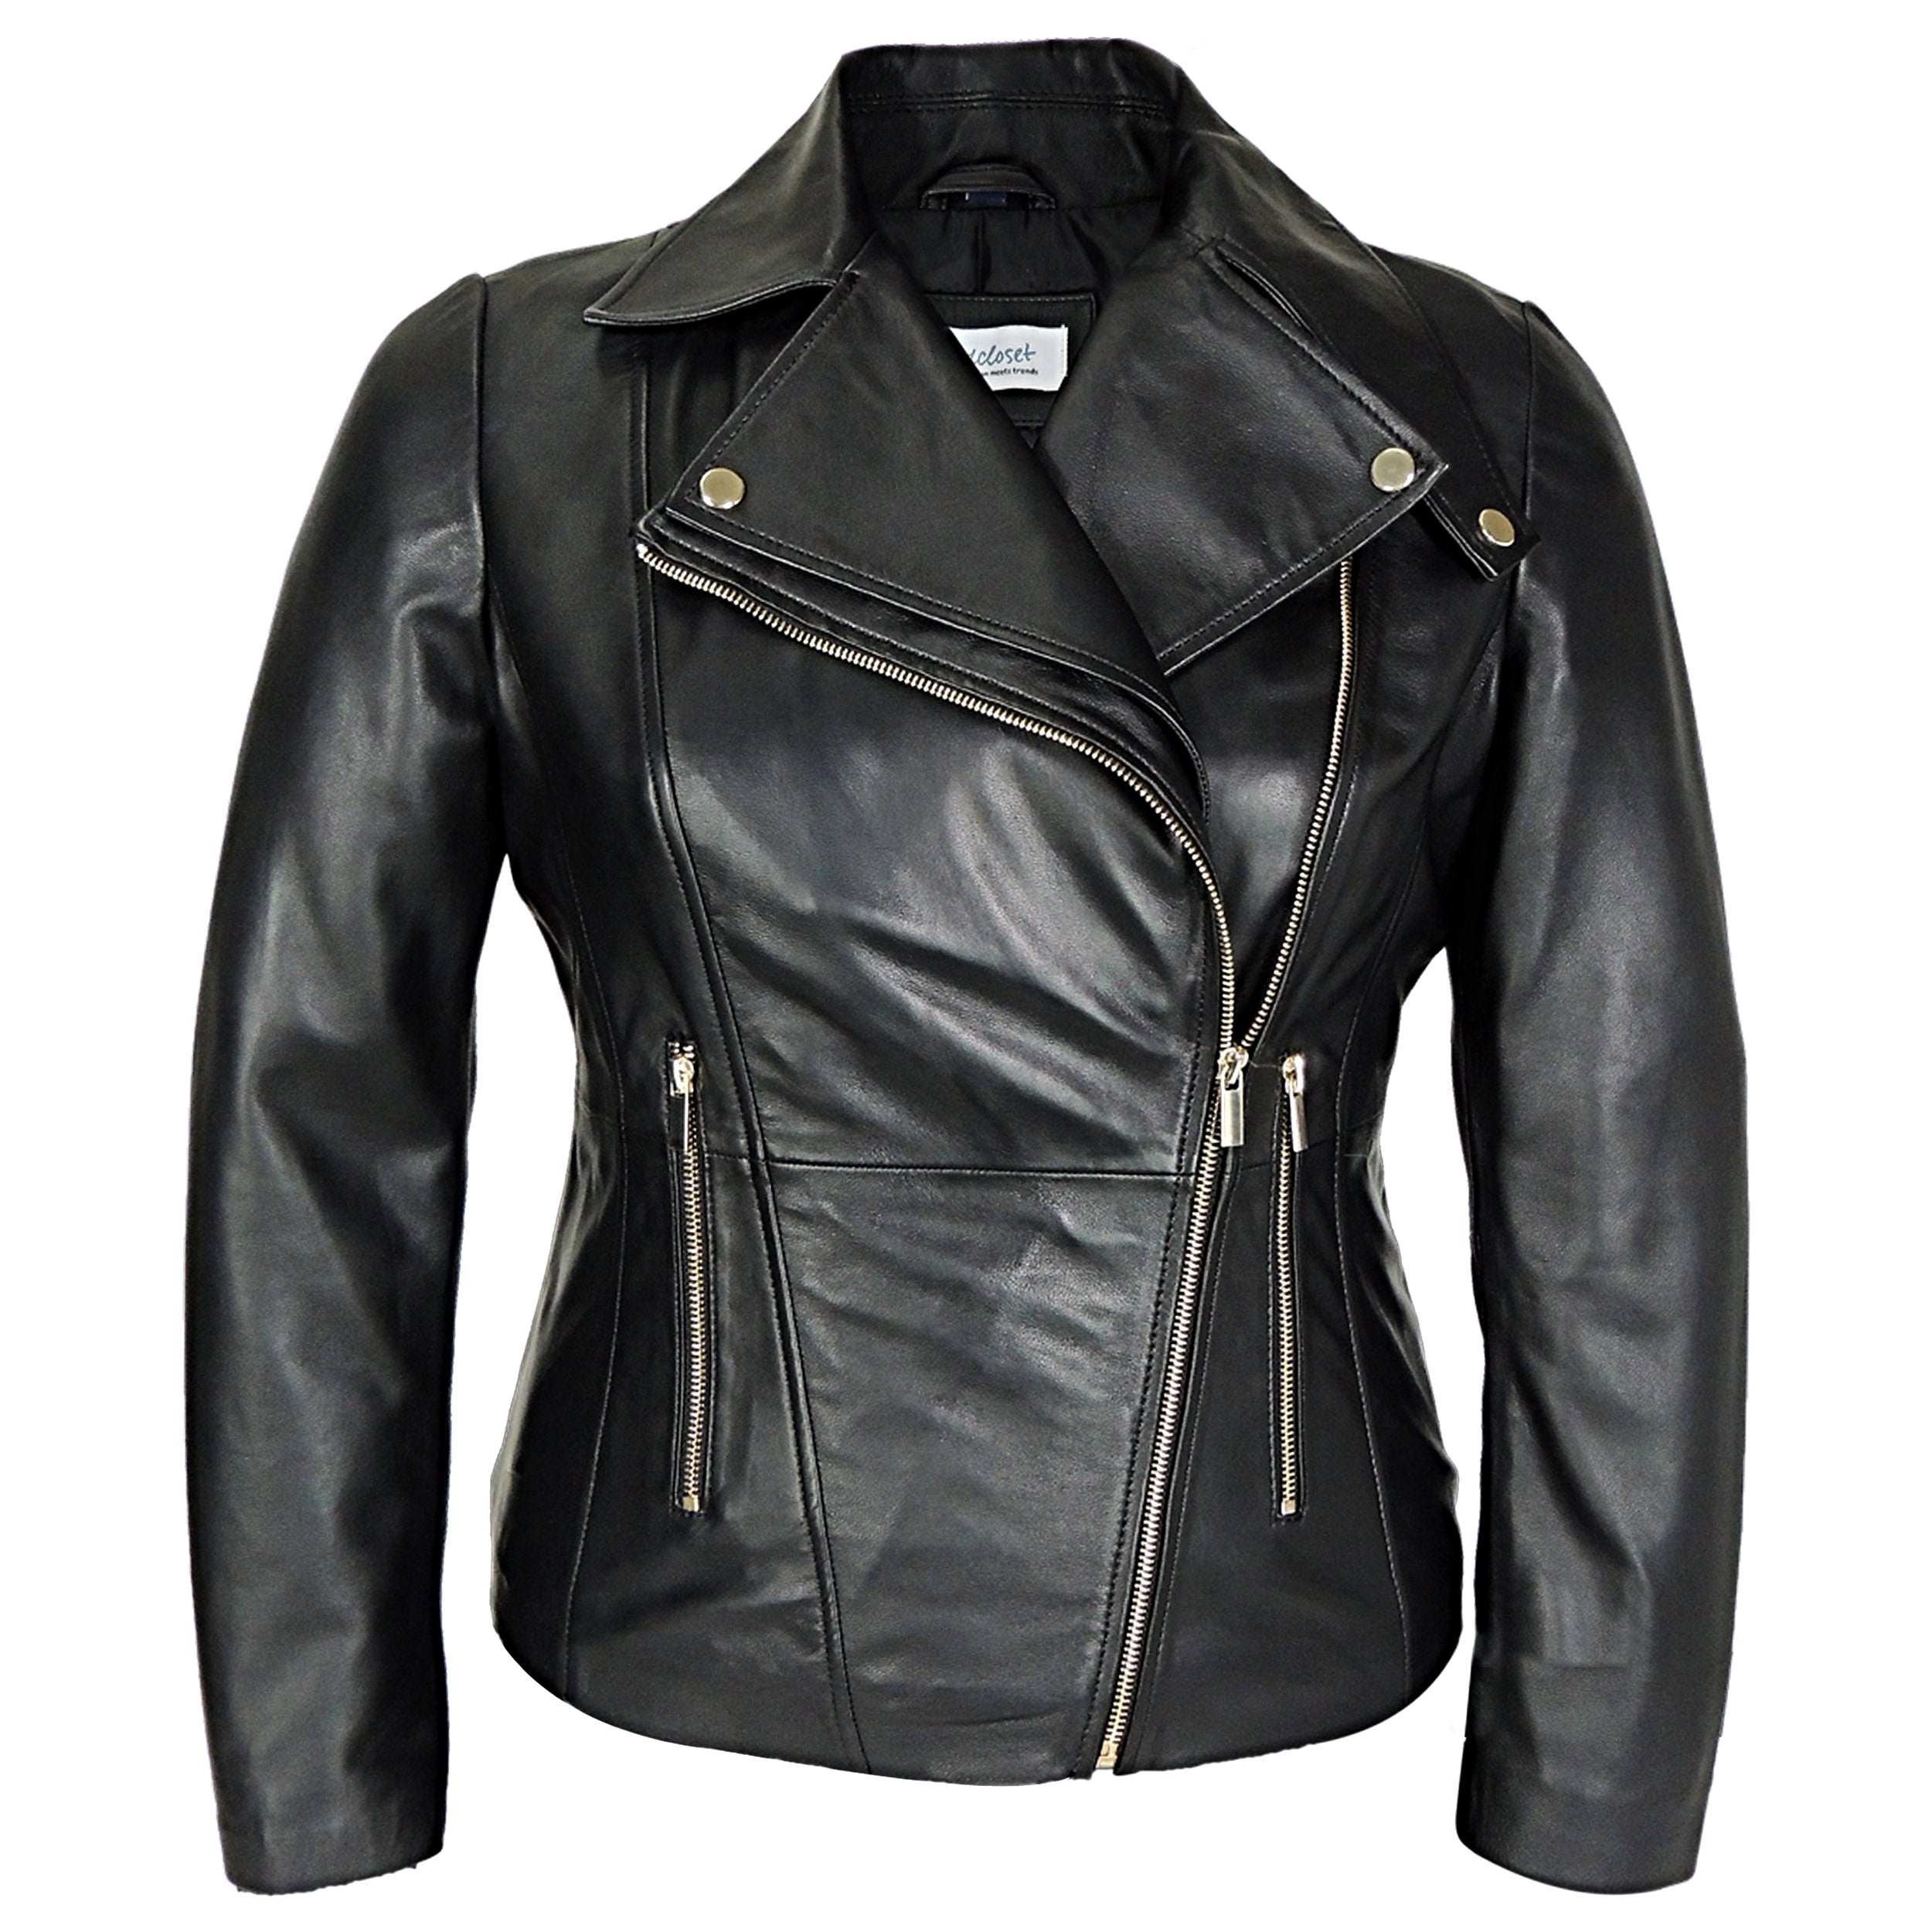 Charlotte Womens Leather Jacket - Discounted! – FADCLOSET